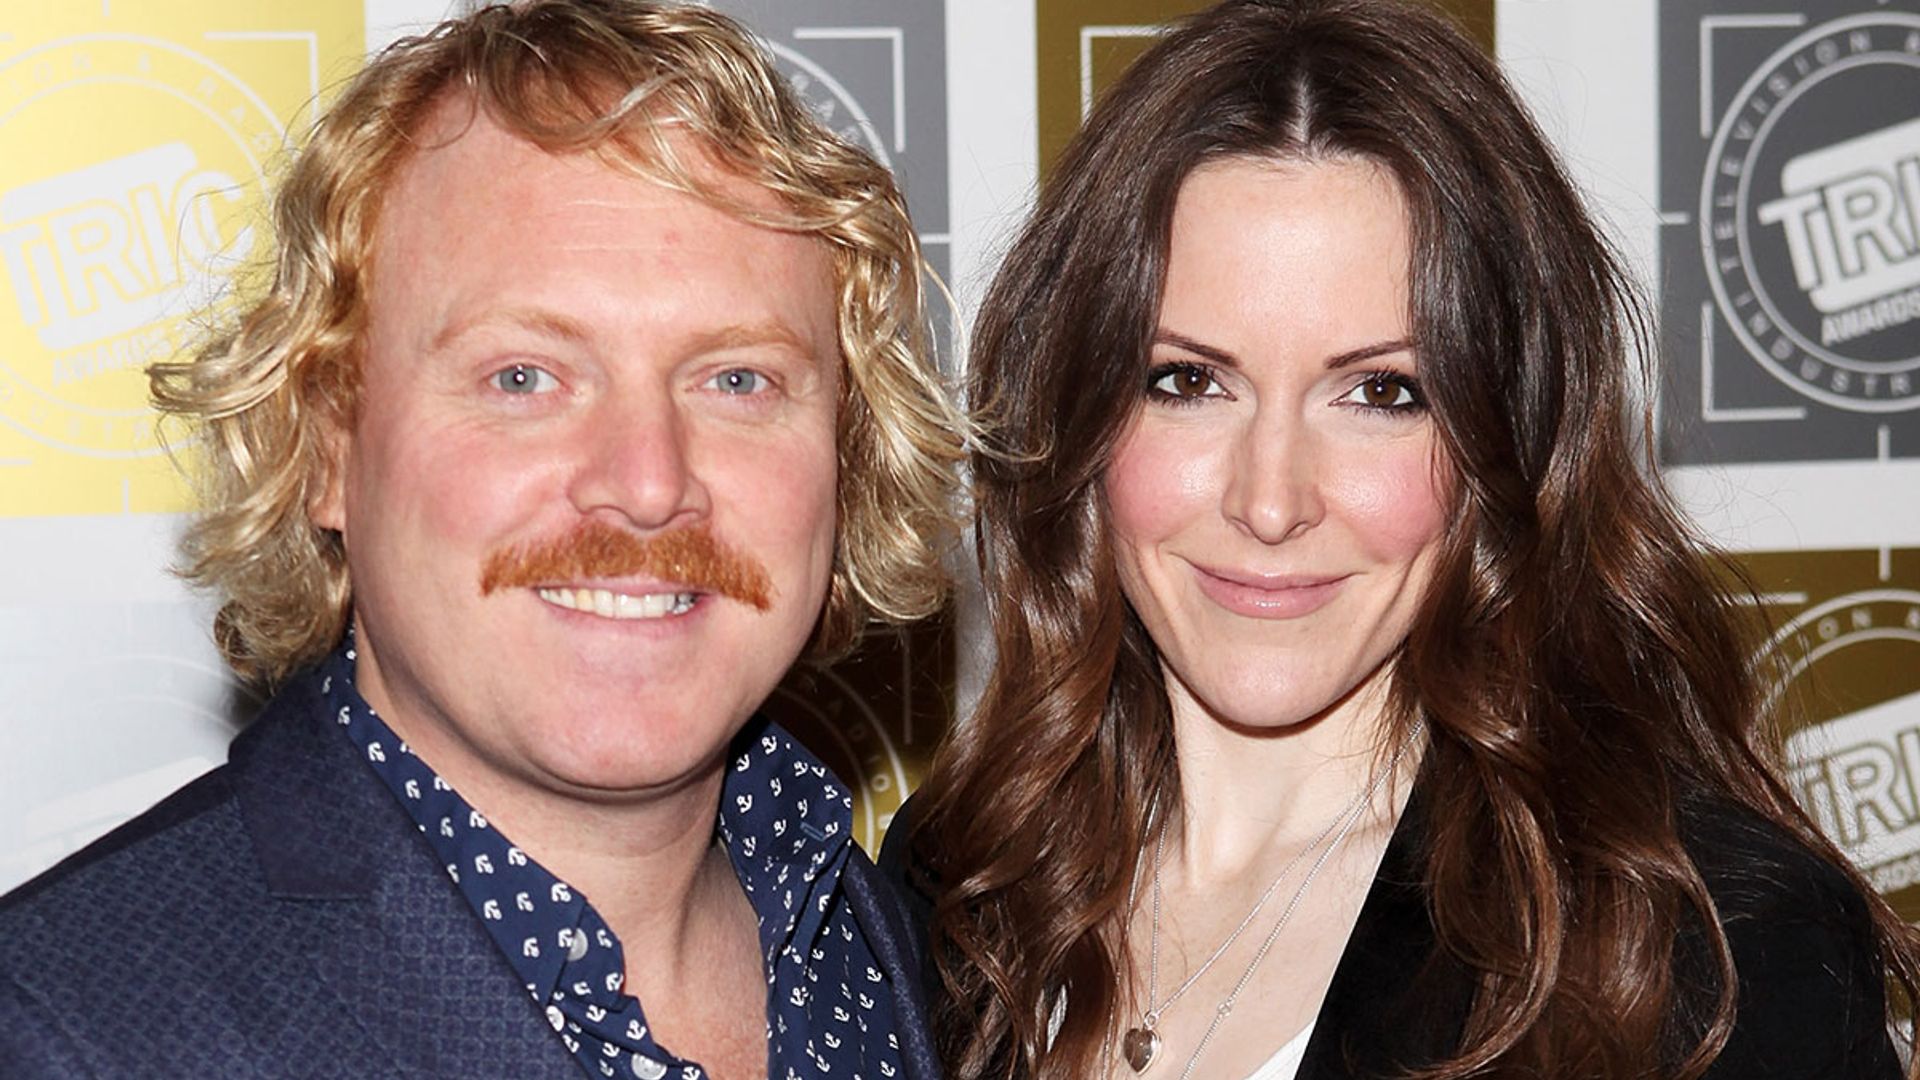 Keith Lemon kisses wife Jill in extremely rare photo - and fans are obsessed